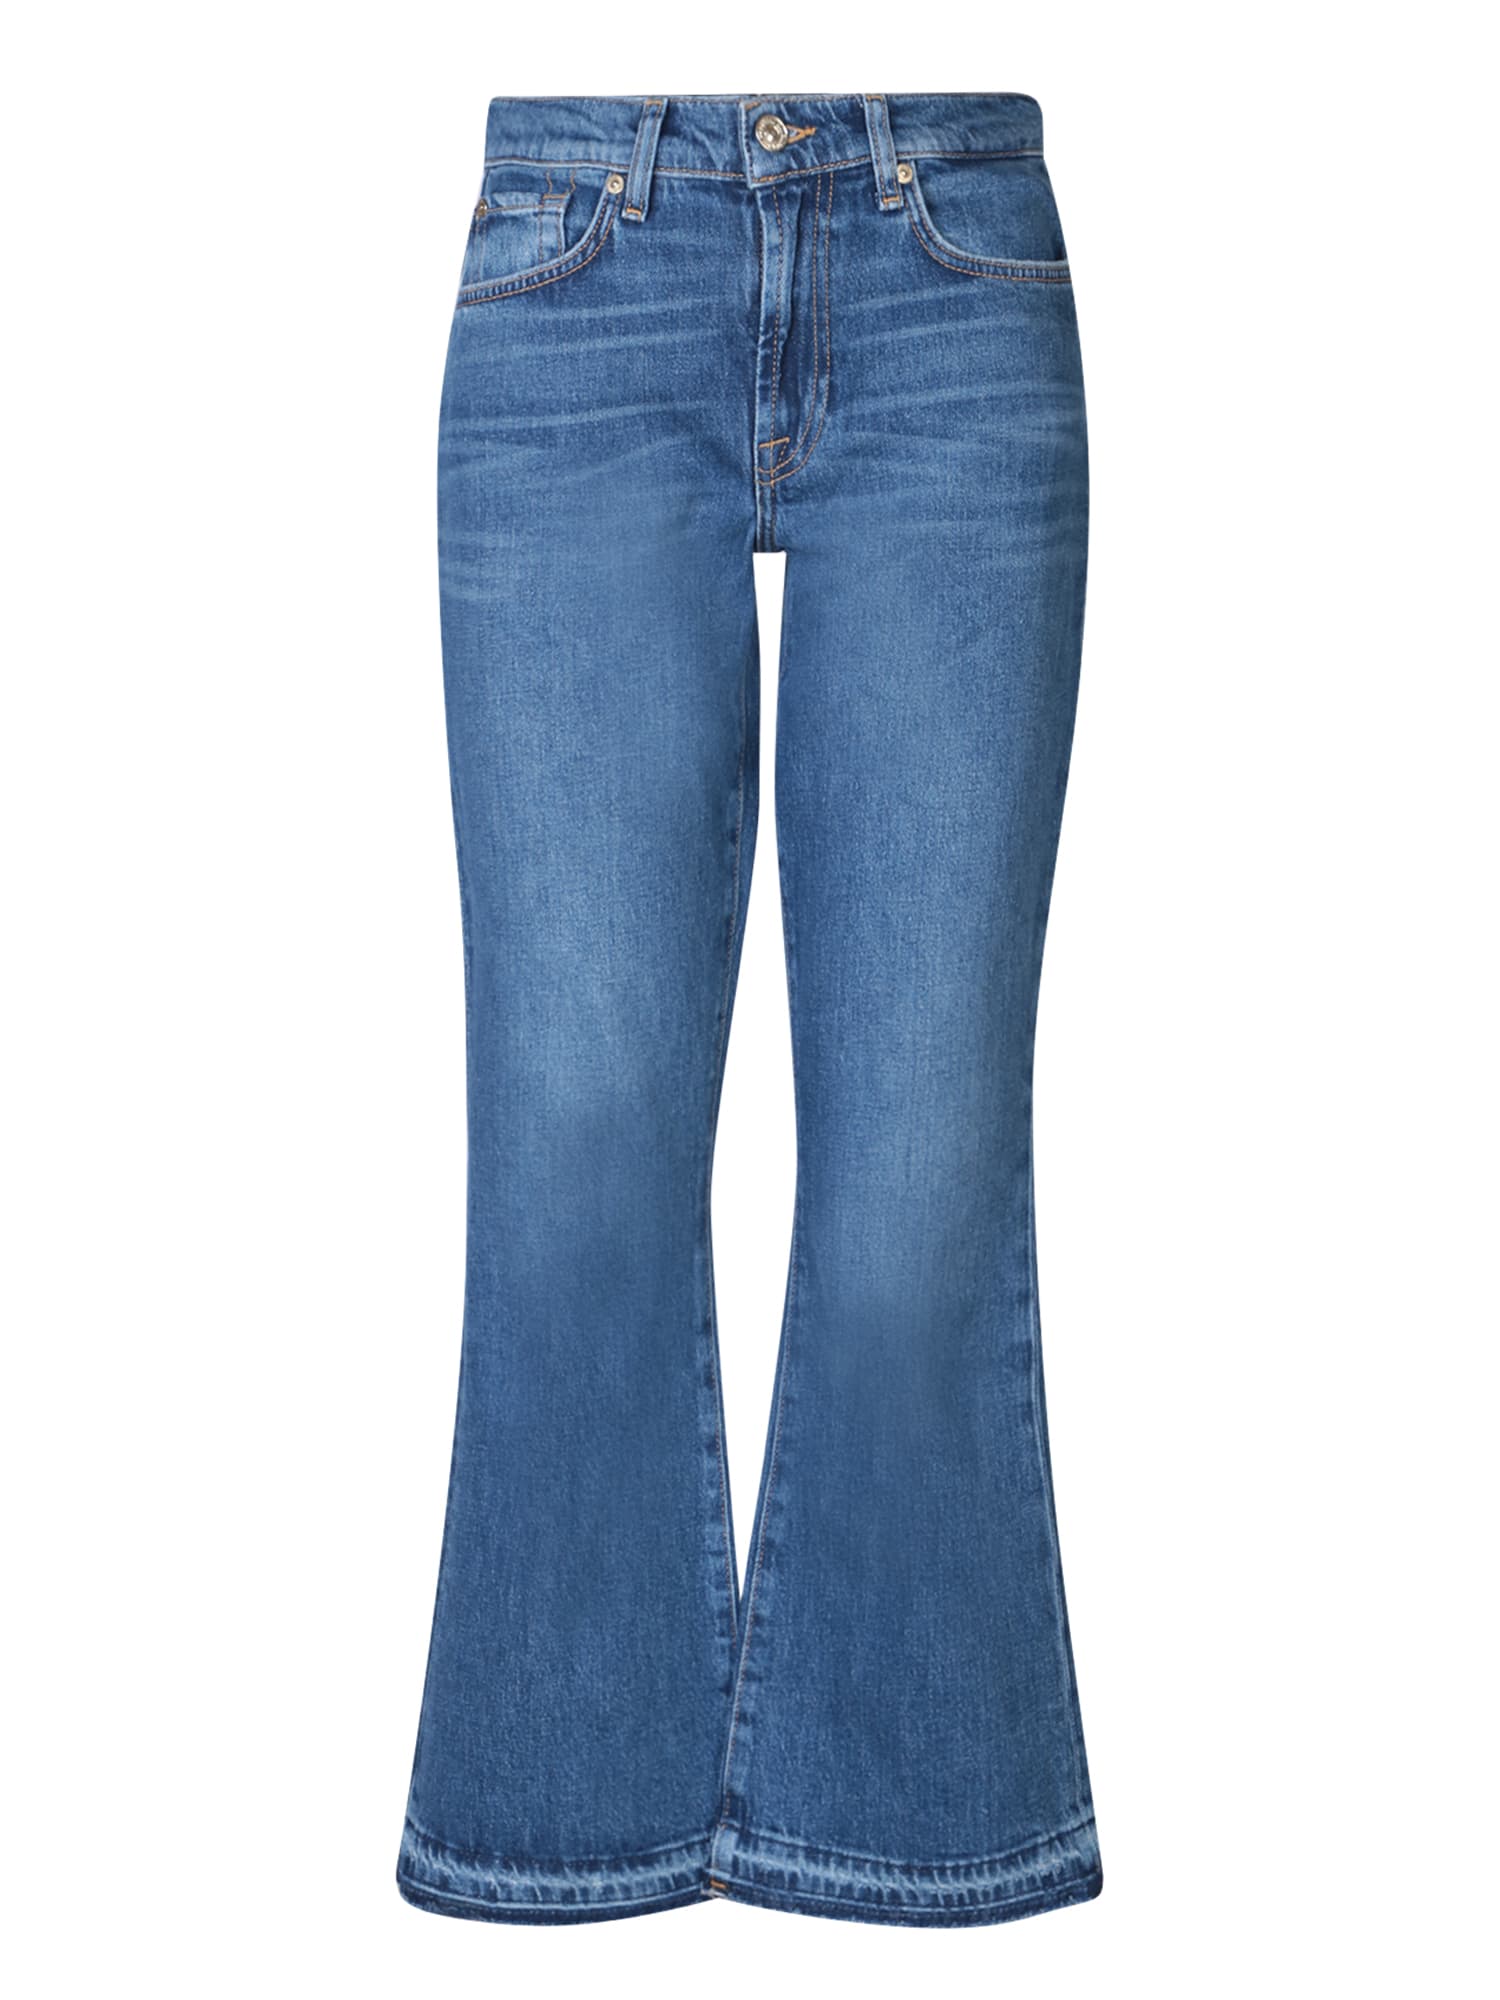 7 FOR ALL MANKIND BOOTCUT BETTY BLUE JEANS